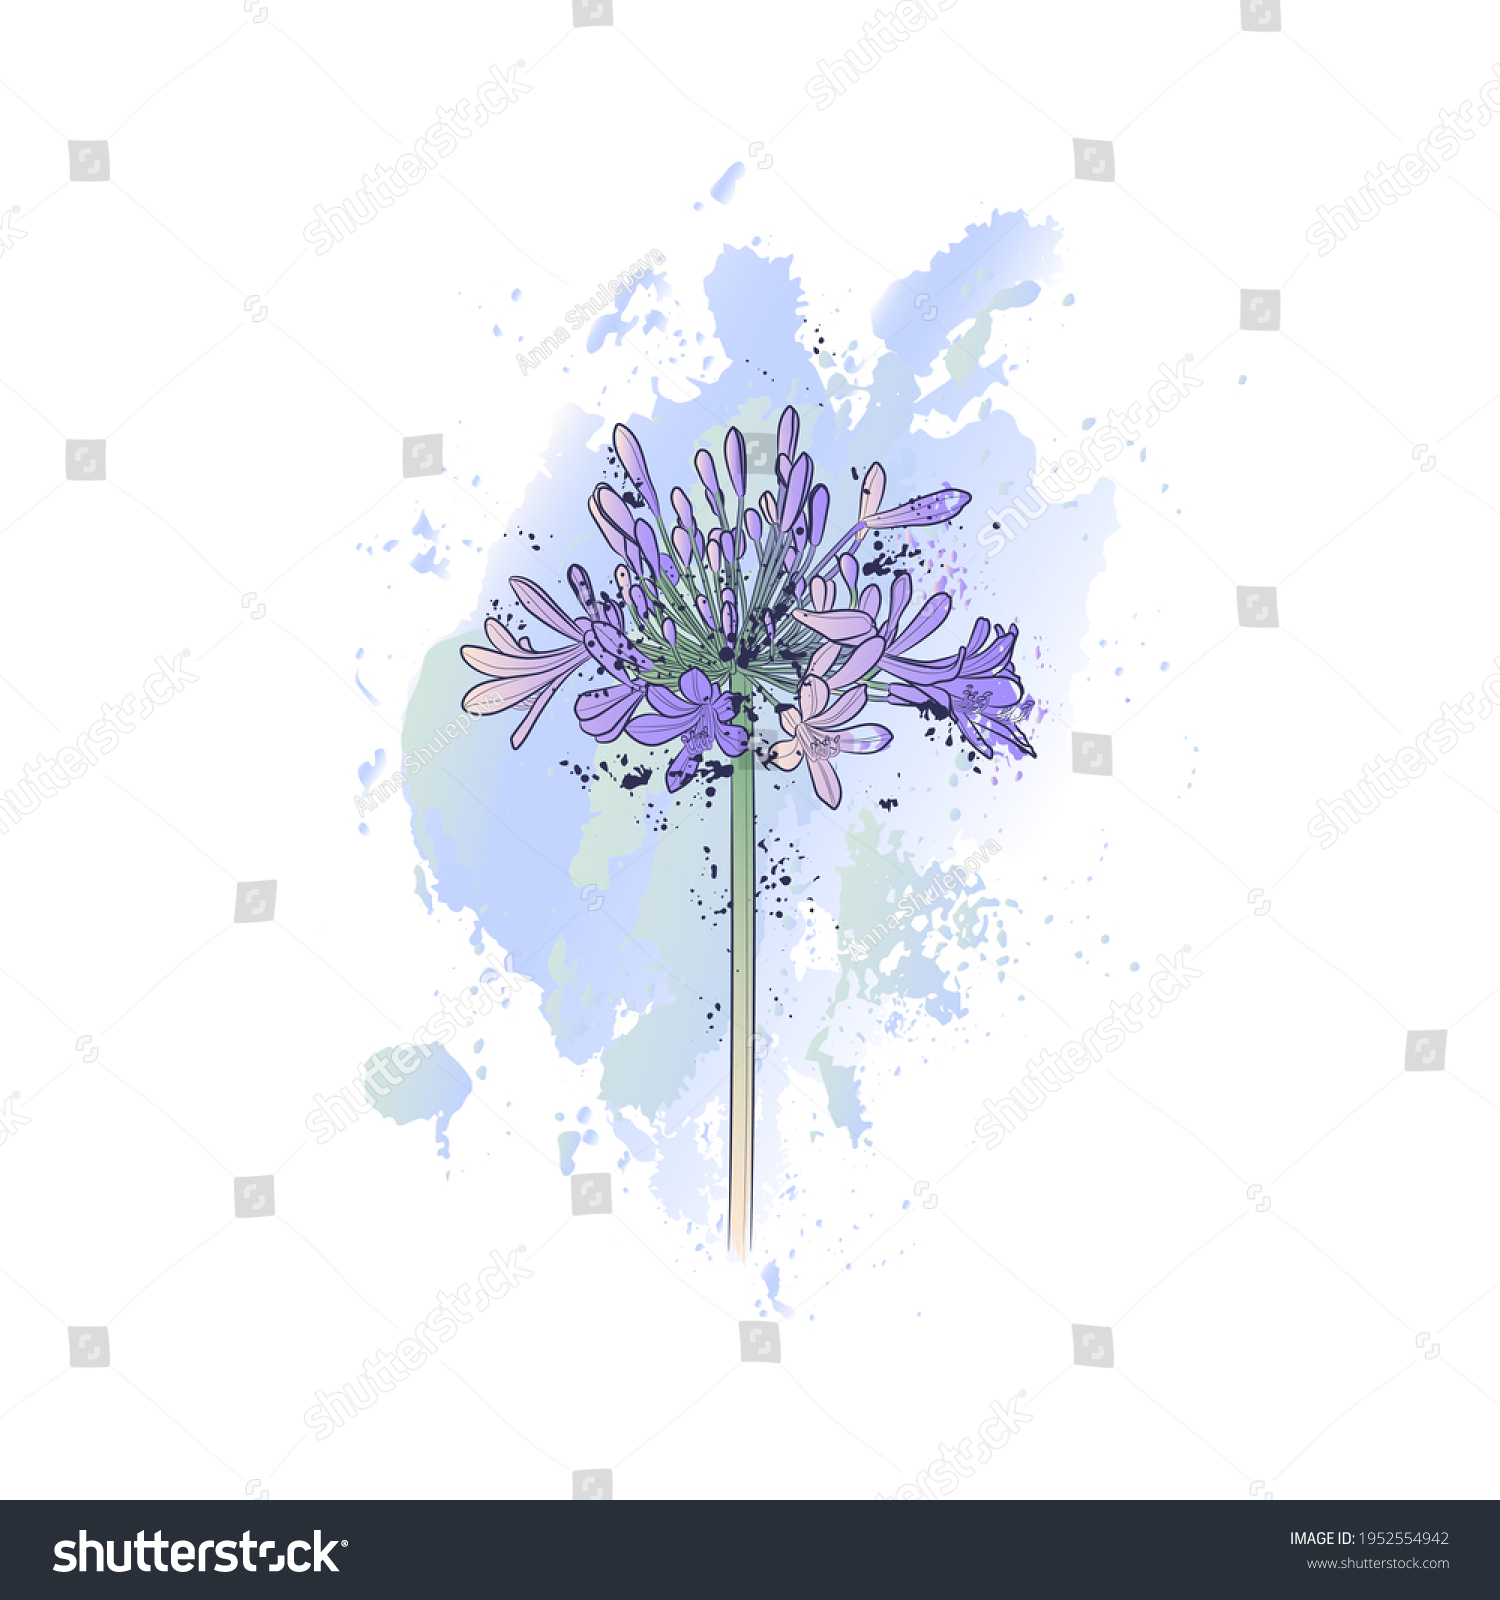 SVG of Decorative background with Lily of the Nile (Agapanthus). Card template design. Vector illustration. svg